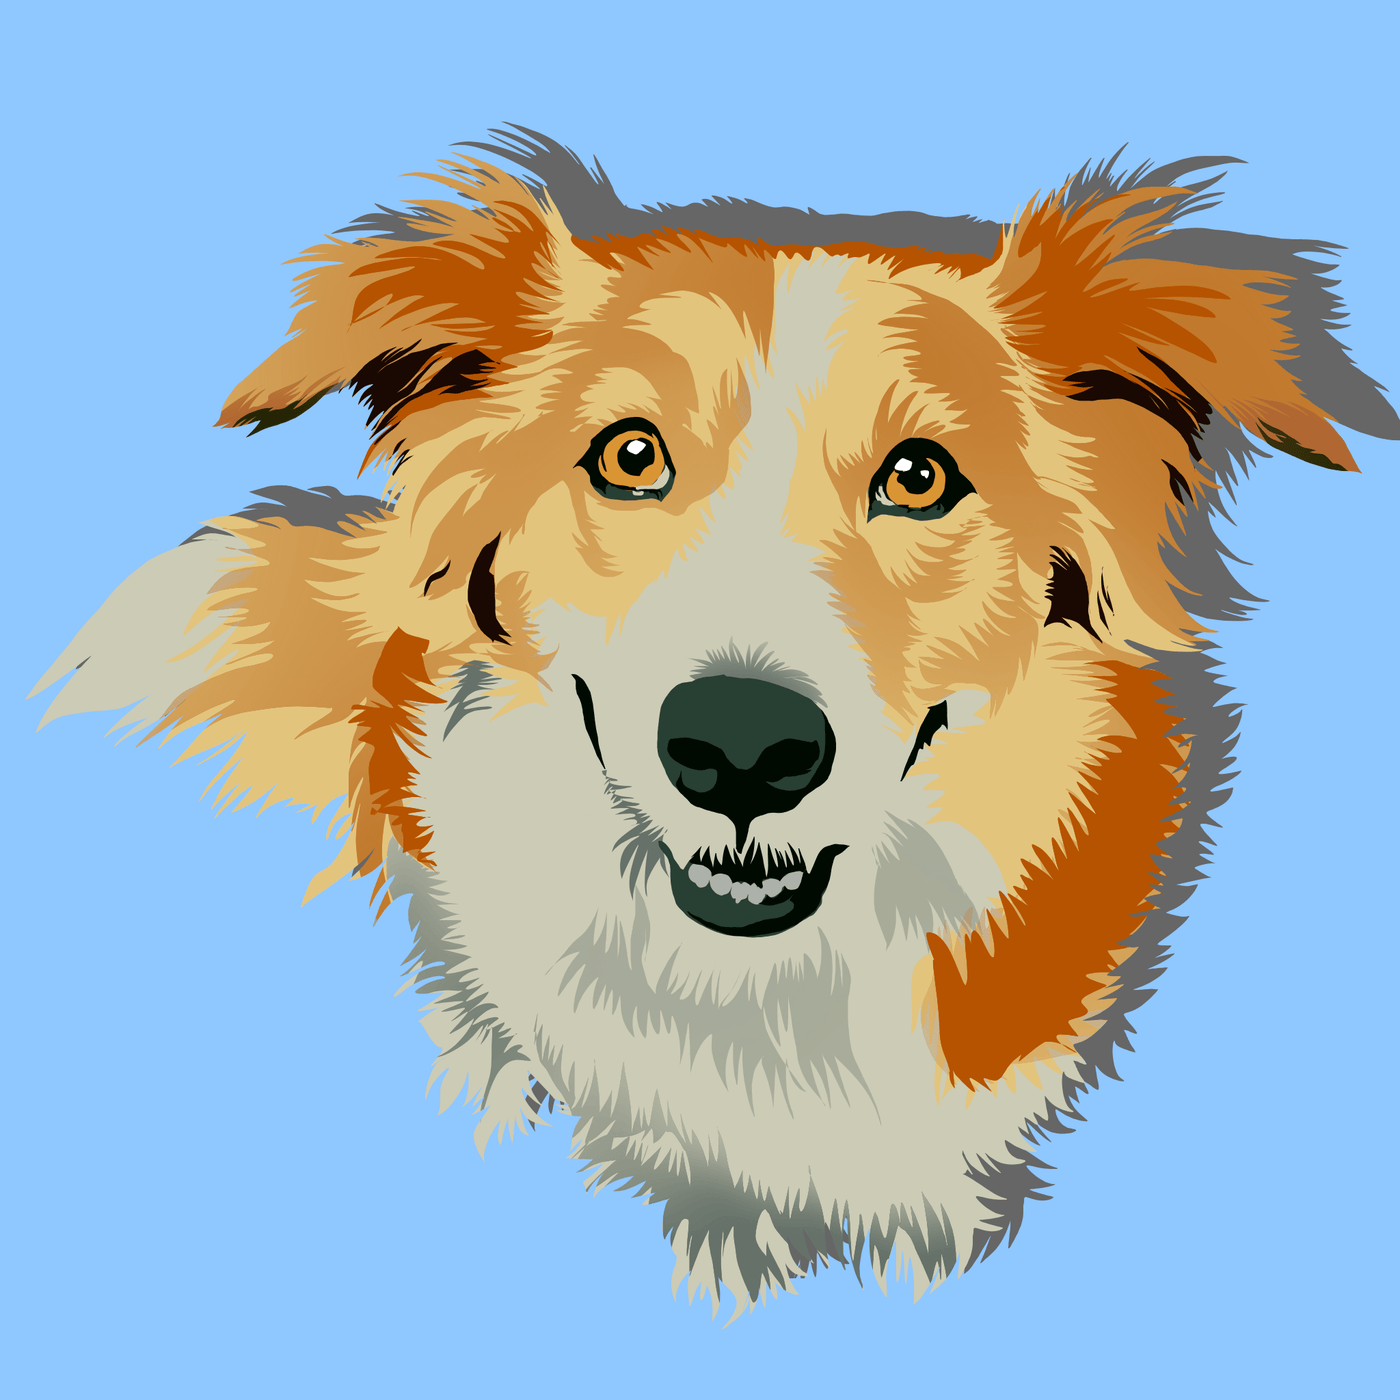 dog vector art of an adorable orange and white tone dog